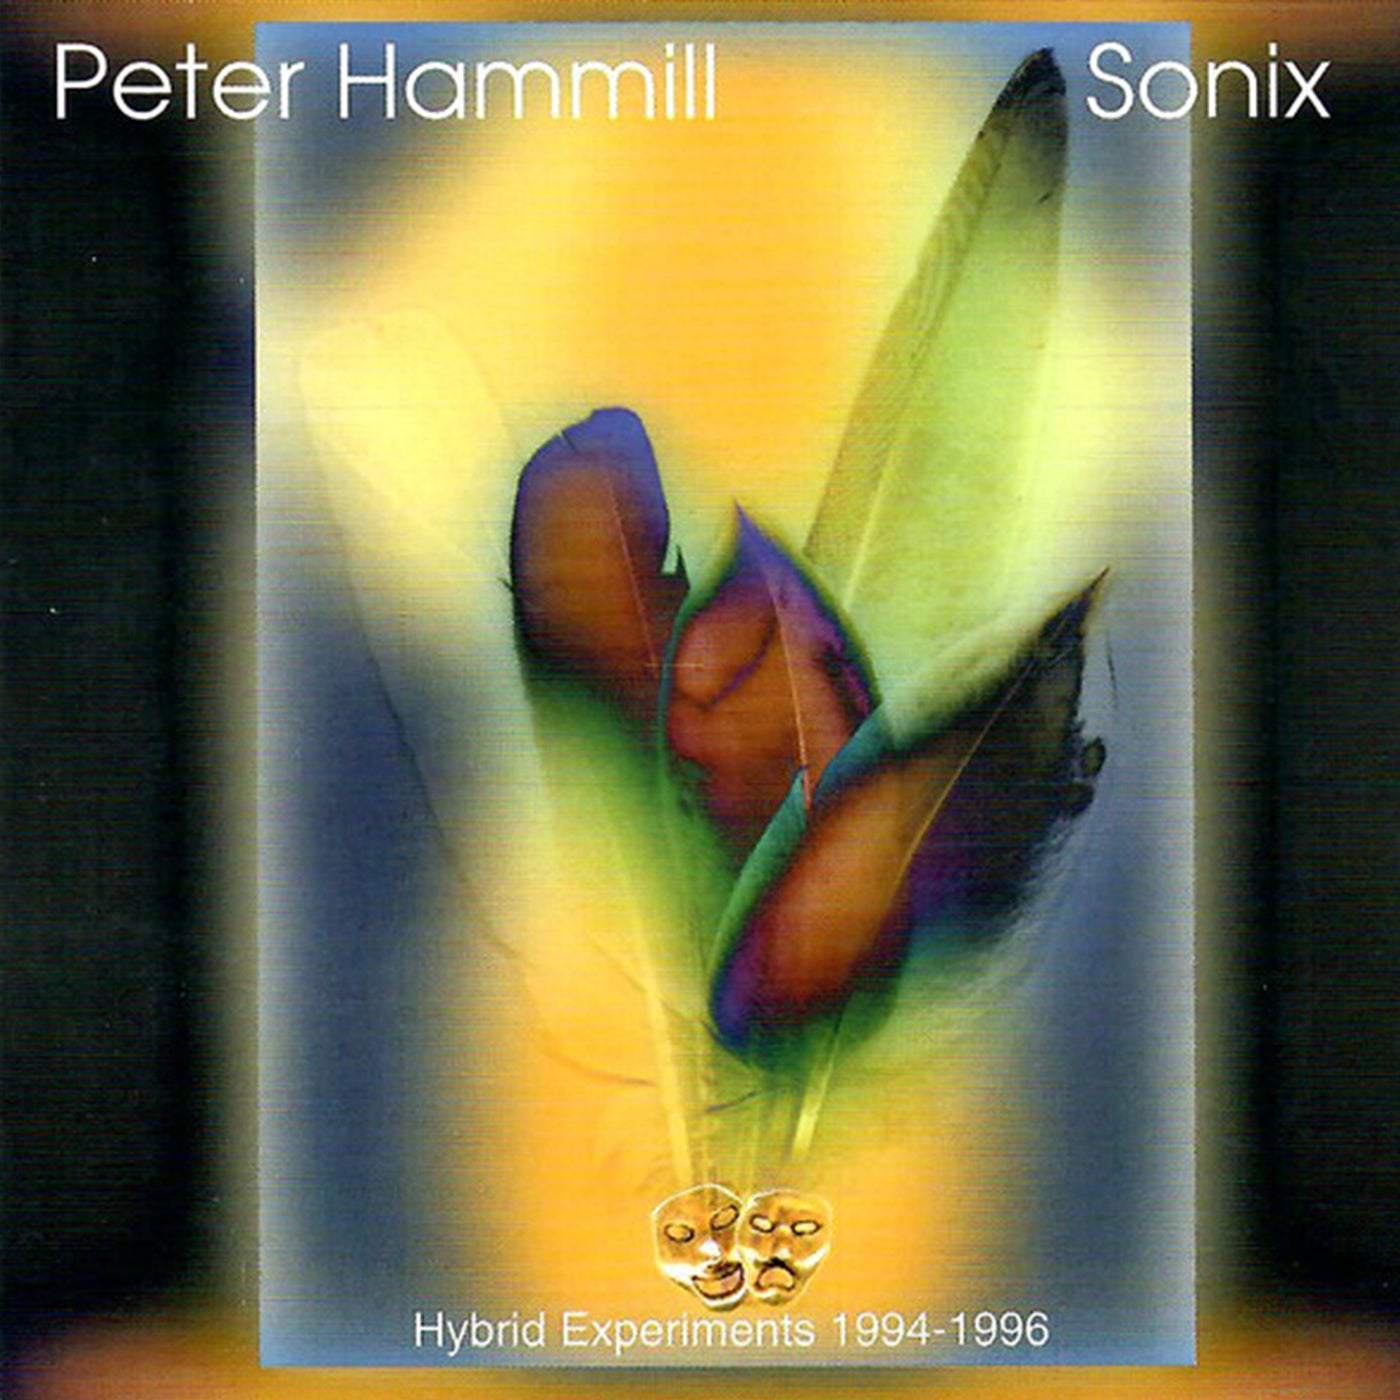 Spur Of The Moment by Peter Hammill and Guy Evans on Beatsource